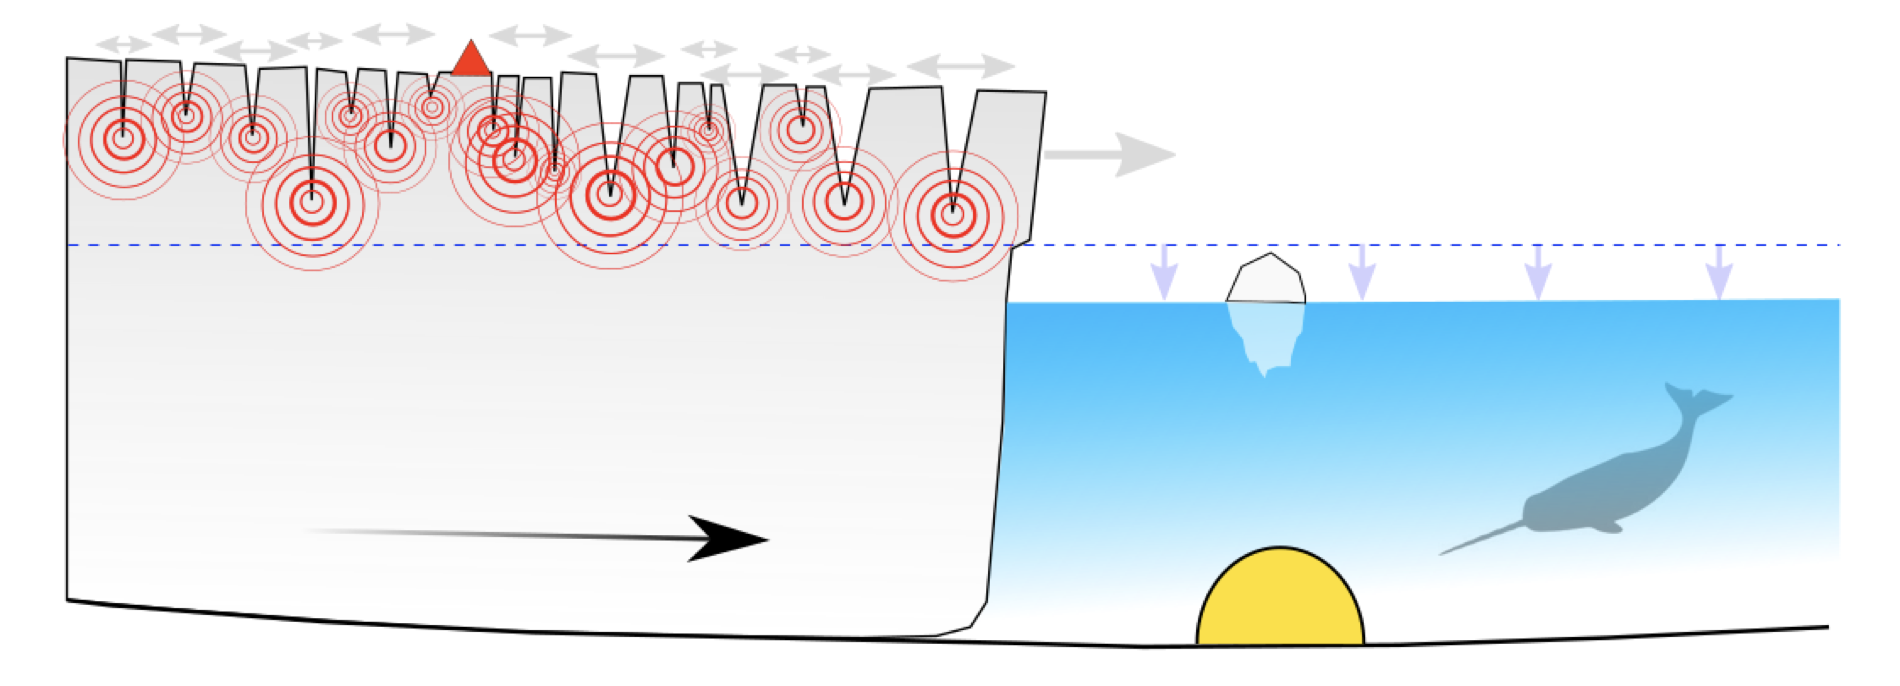 Ocean-bottom seismometer (OBS) near the calving front. The OBS (yellow semicircle) is deployed some distance away from the glacier. It captures all the sounds in the ocean, including vibrations of the seafloor due to glacier movement and whale songs (after Podolskiy et al., Nature Communications, 2021).